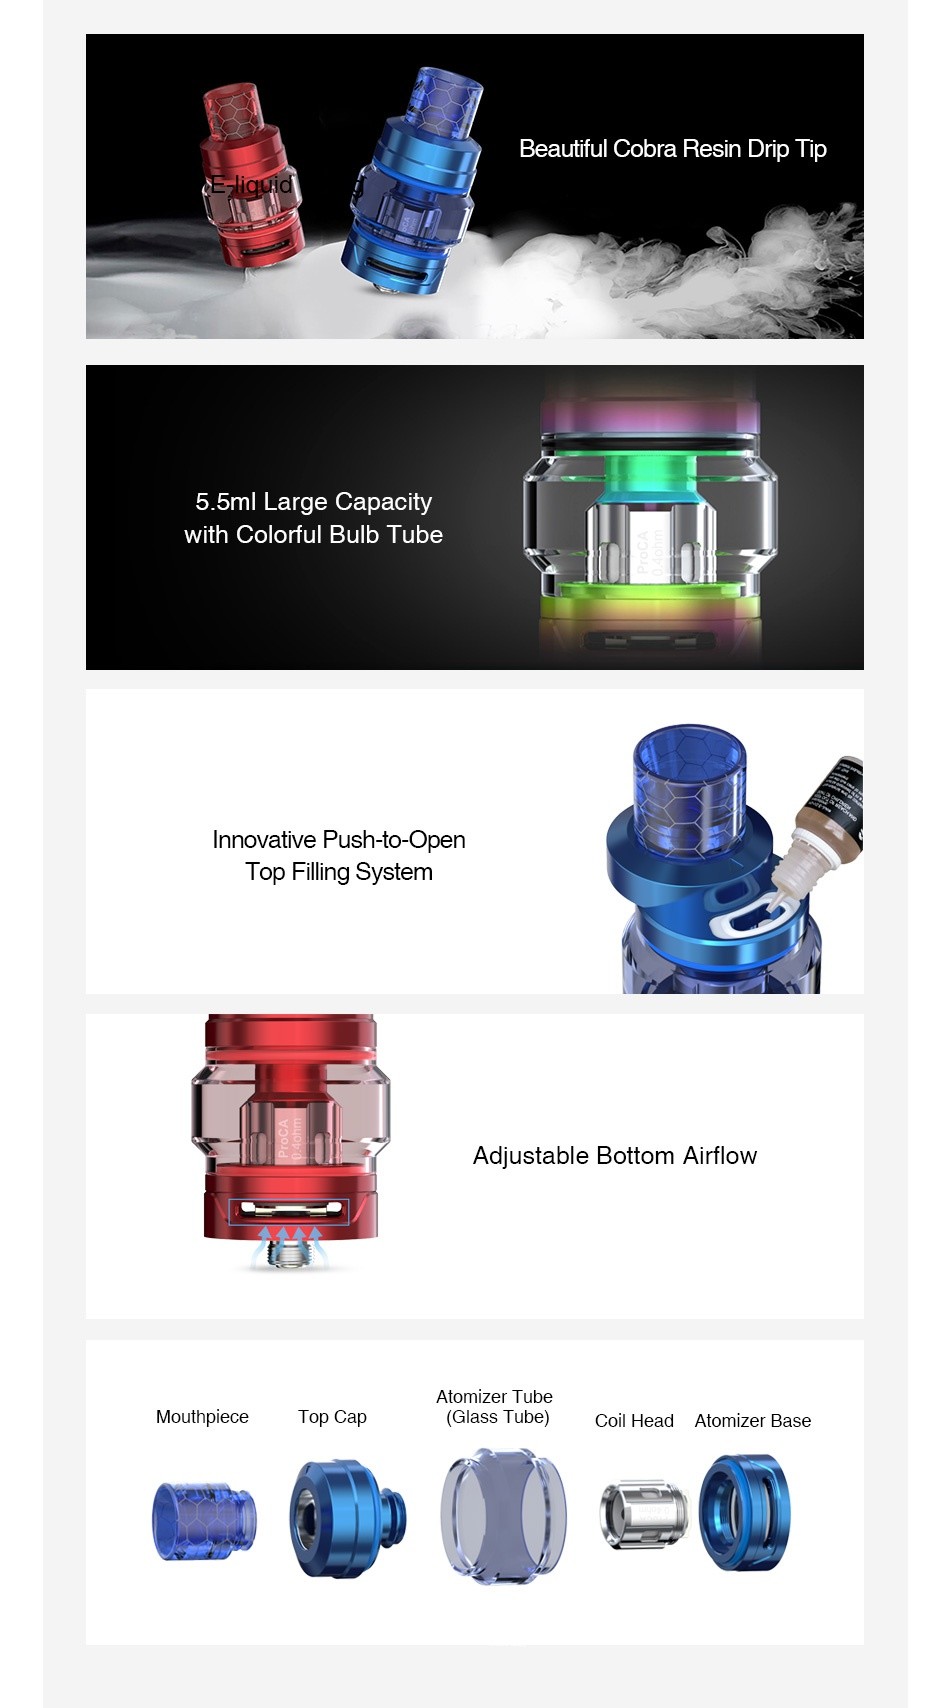 Joyetech ProCore Air Plus Atomizer 5.5ml Beautiful Cobra Resin Drip Tip 5  5ml Large Capacity with Colorful bulb tube Innovative Push to Open Top Filling System Adjustable Bottom Airflow tomizer tube Mouthpiece Top Cap  Glass Tube  Coil head Atomizer base